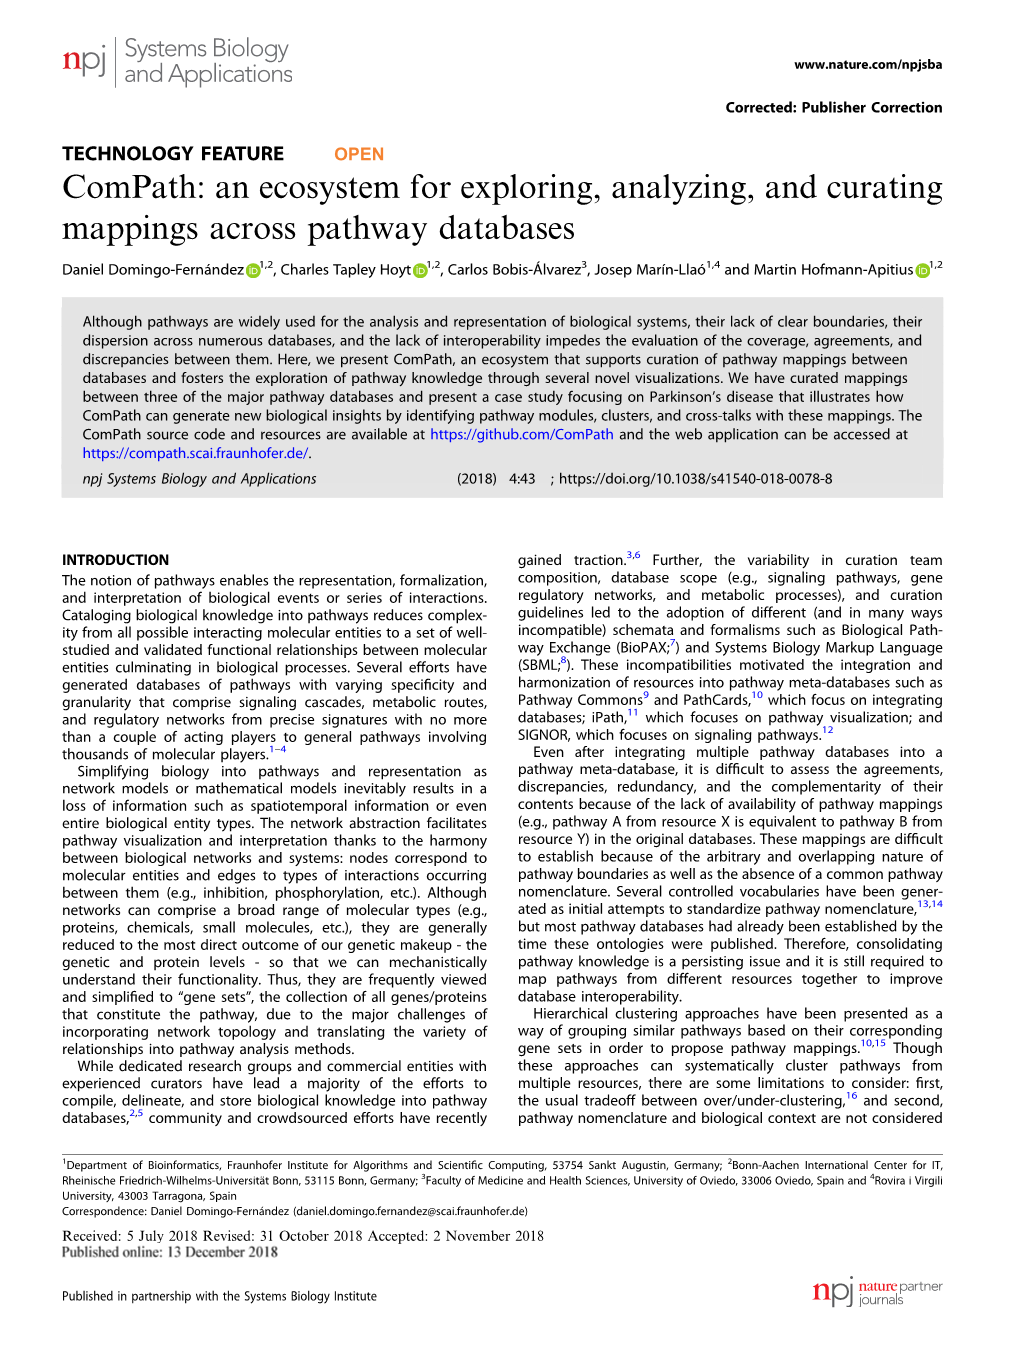 An Ecosystem for Exploring, Analyzing, and Curating Mappings Across Pathway Databases